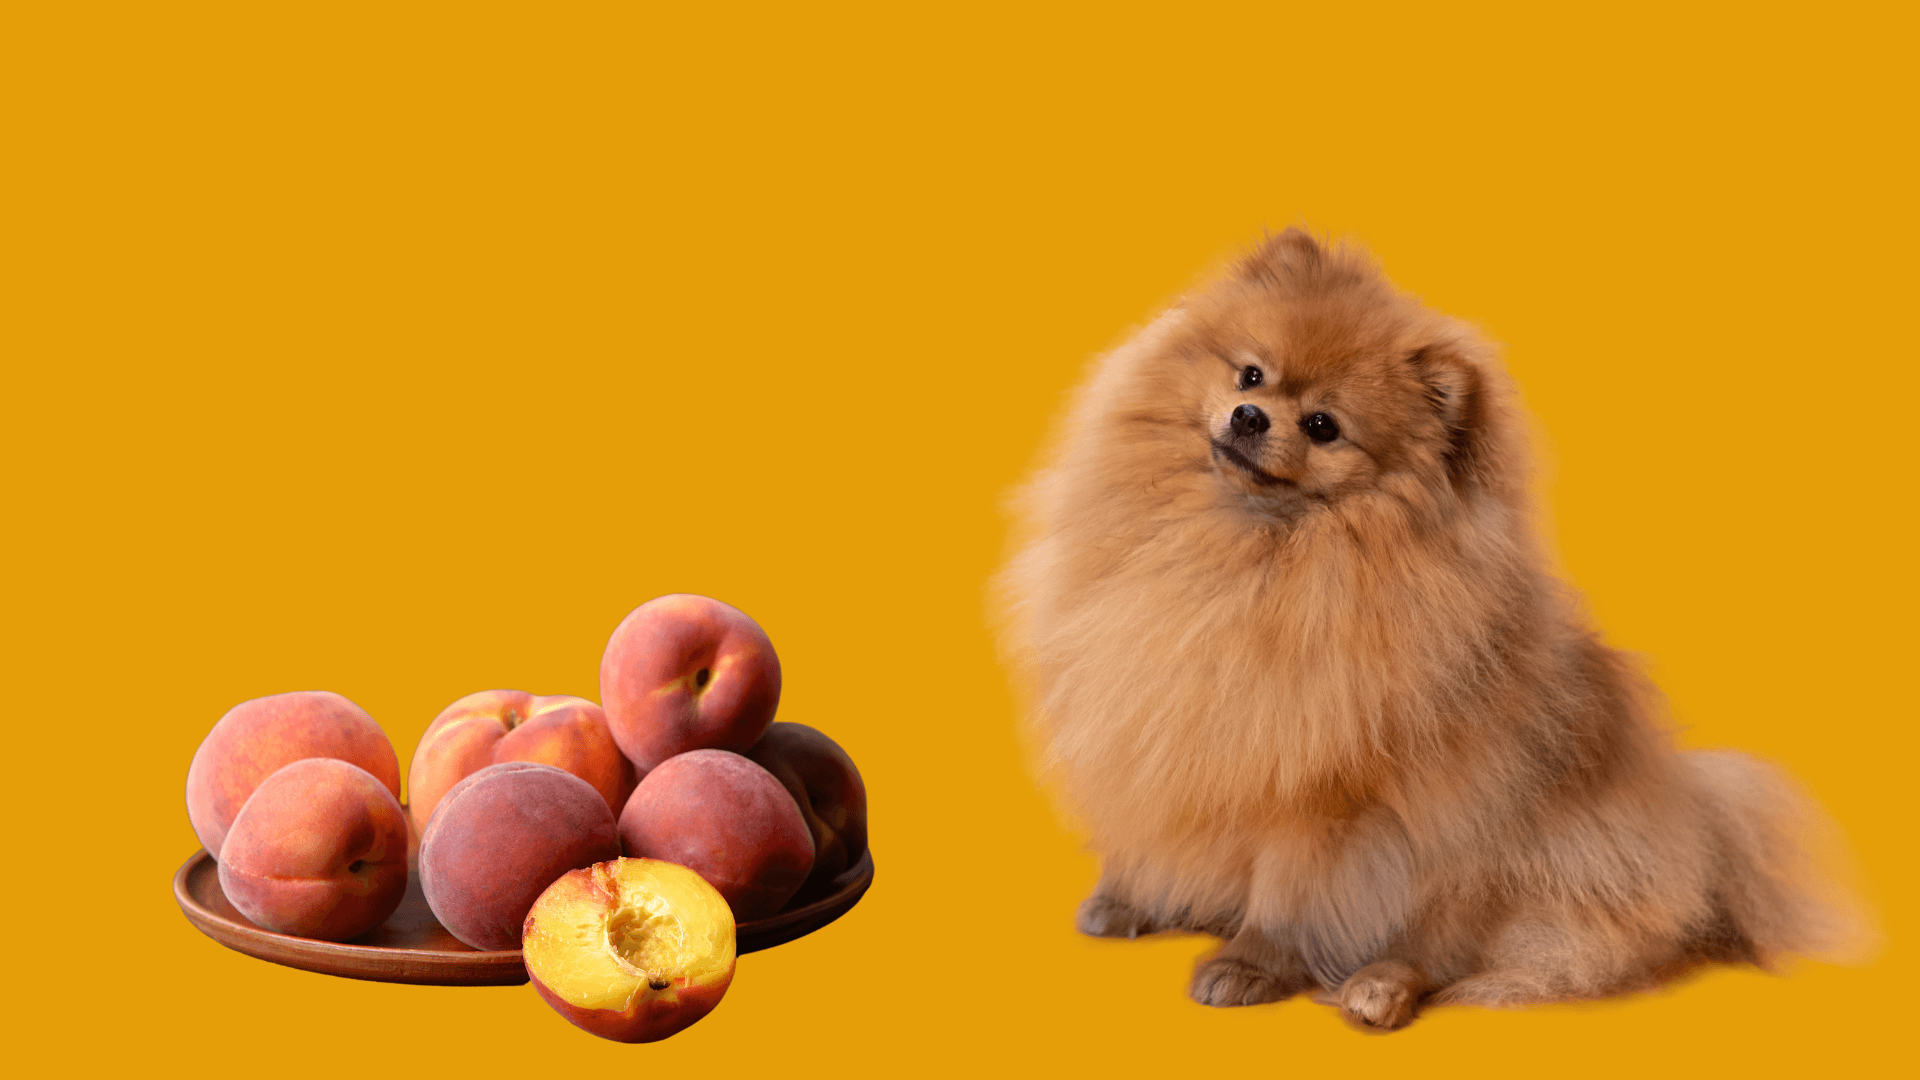 Tips for Safely Sharing Peaches with Your Dog